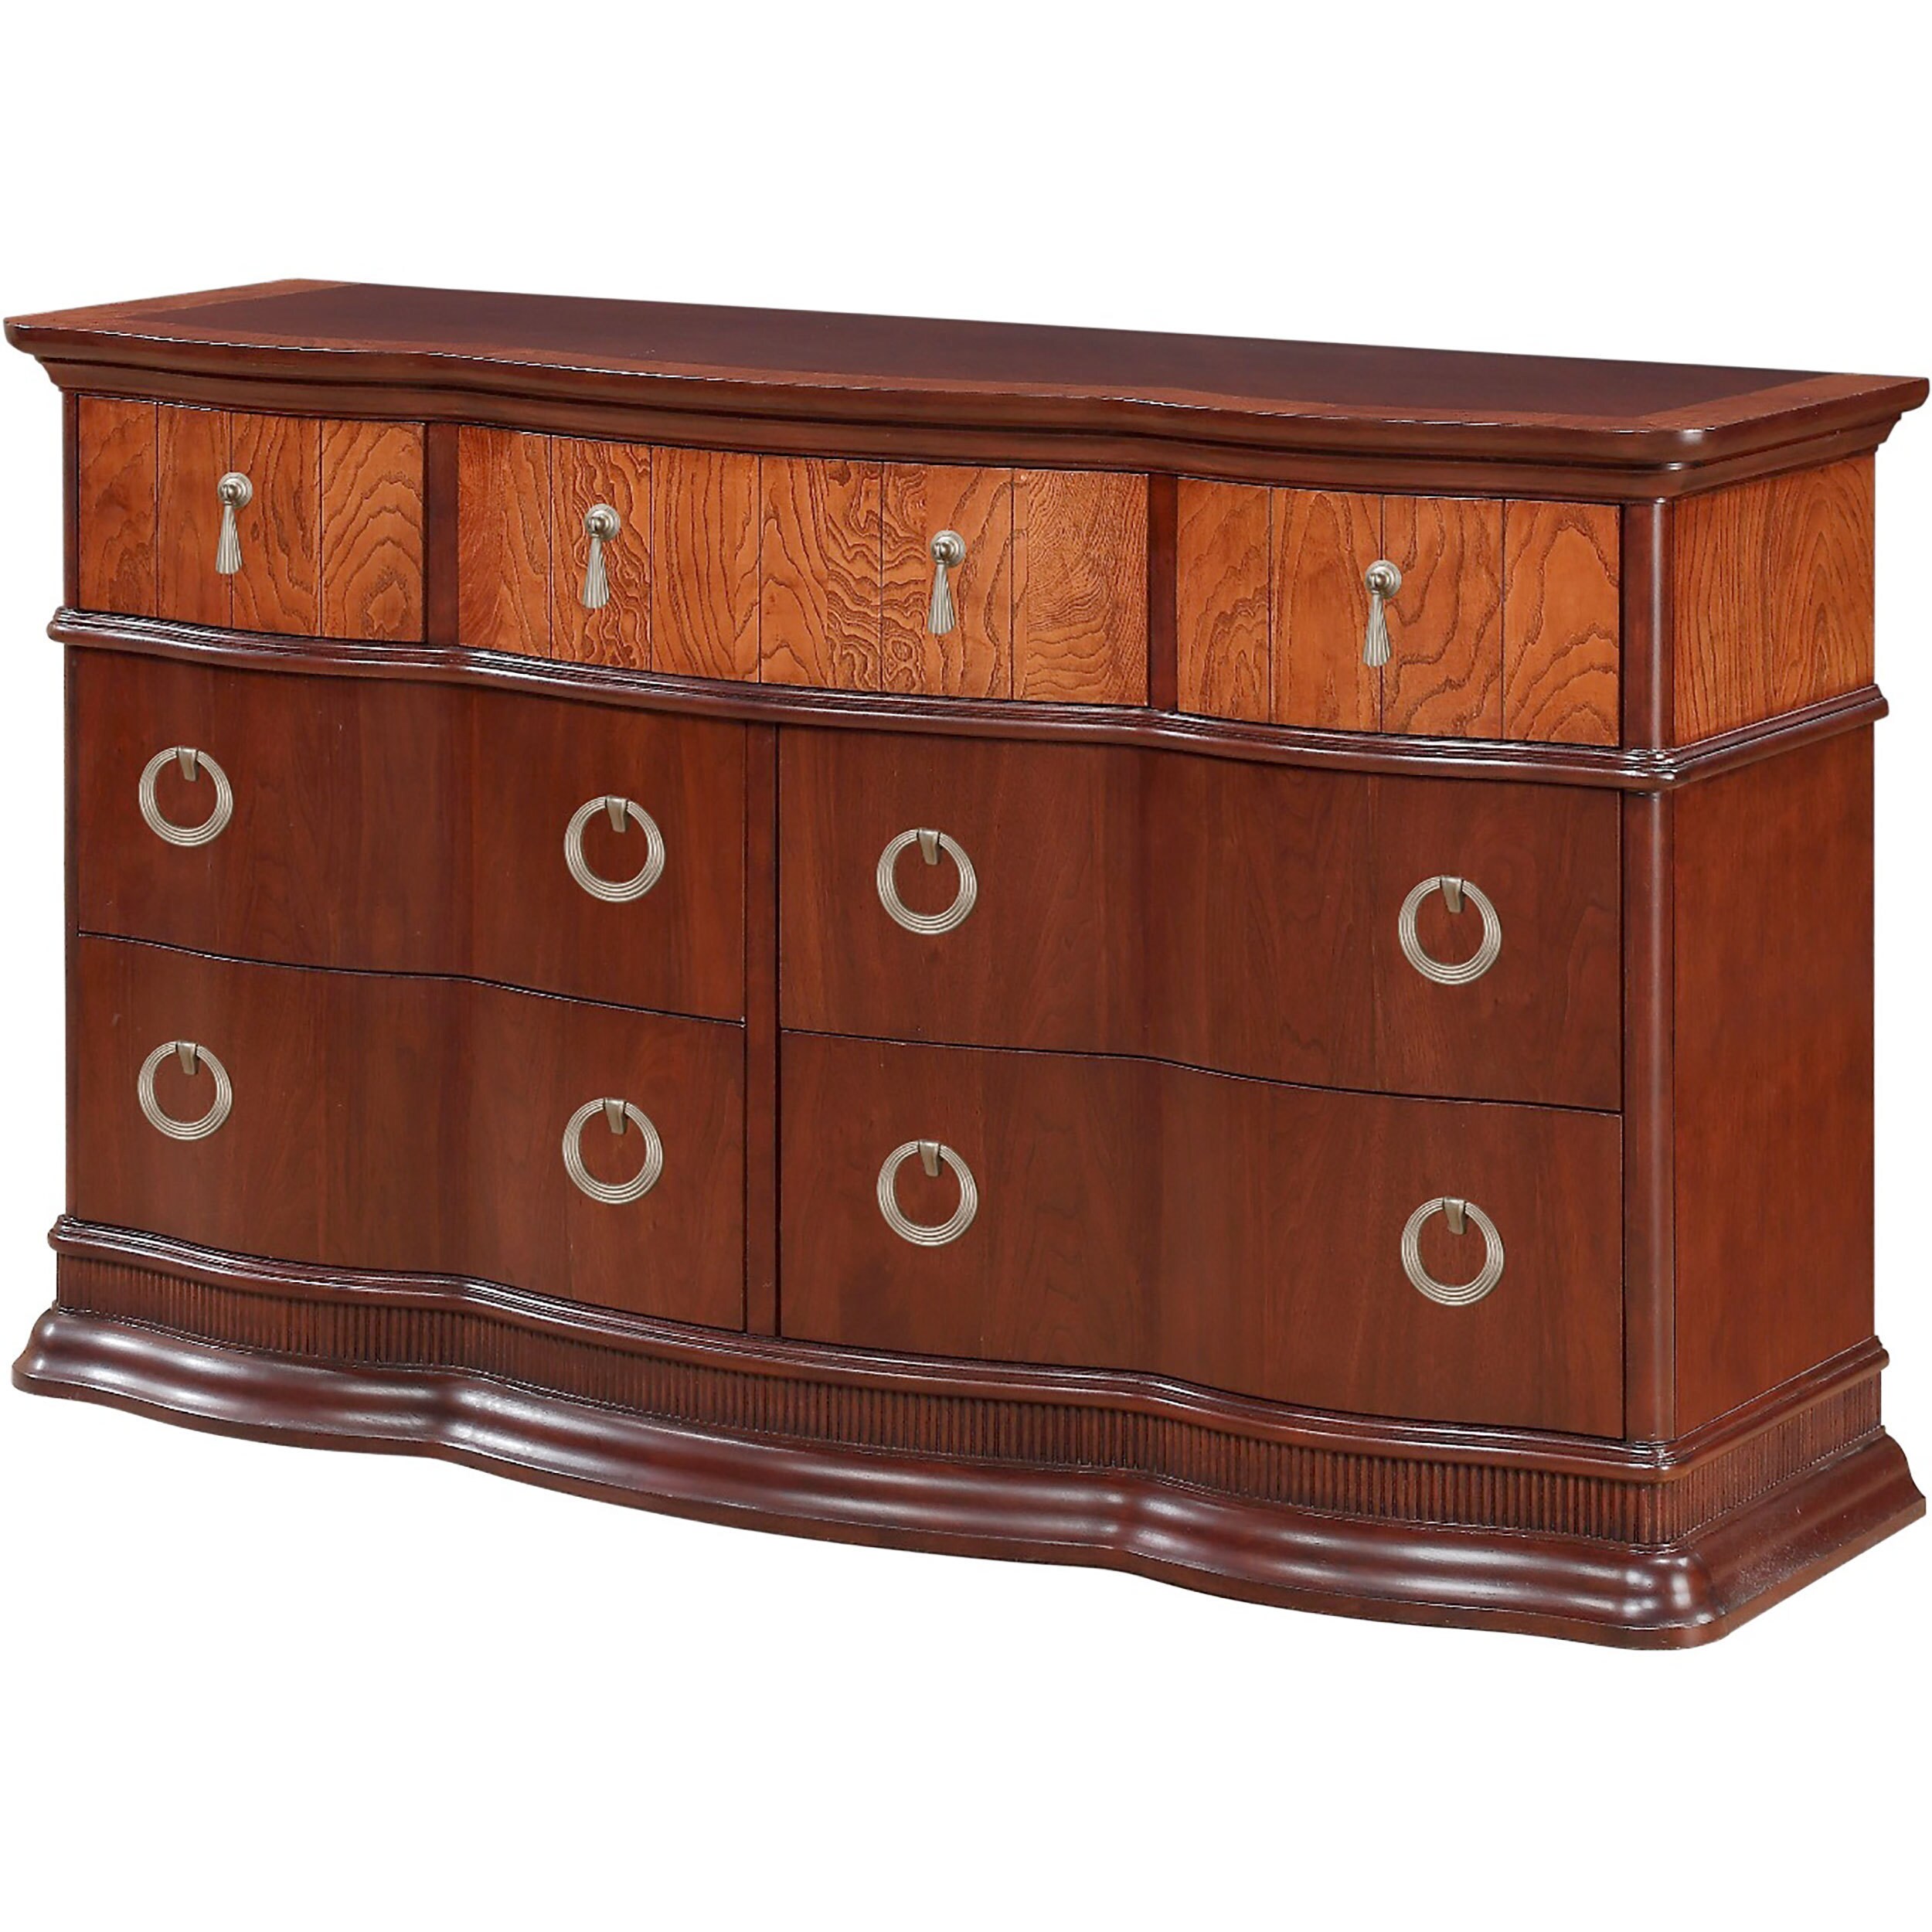 Shop Munire Portland 6 Drawer Double Dresser Free Shipping Today